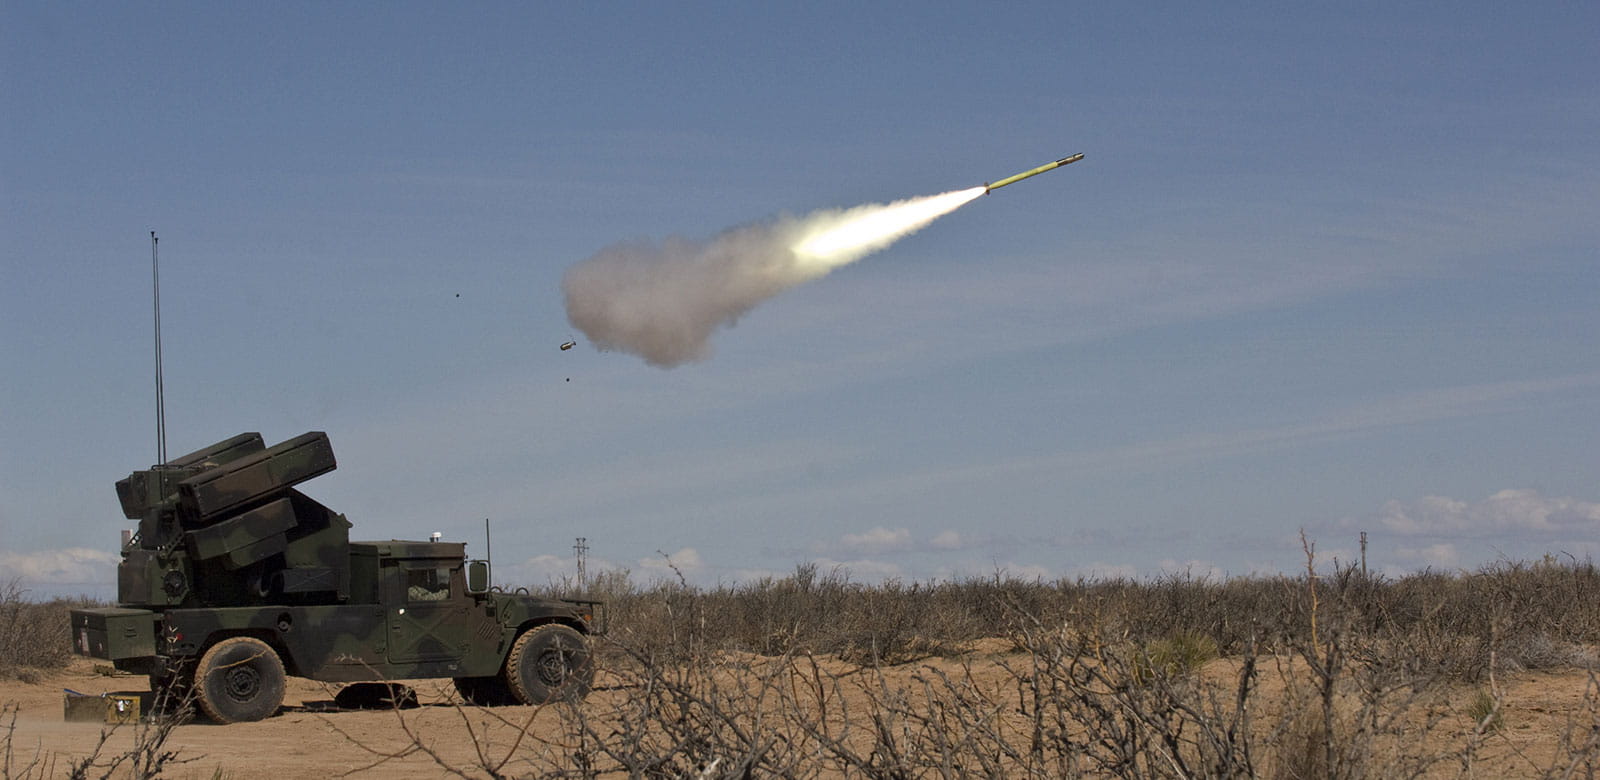 Stinger missile being deployed from a launcher on top of a vehicle